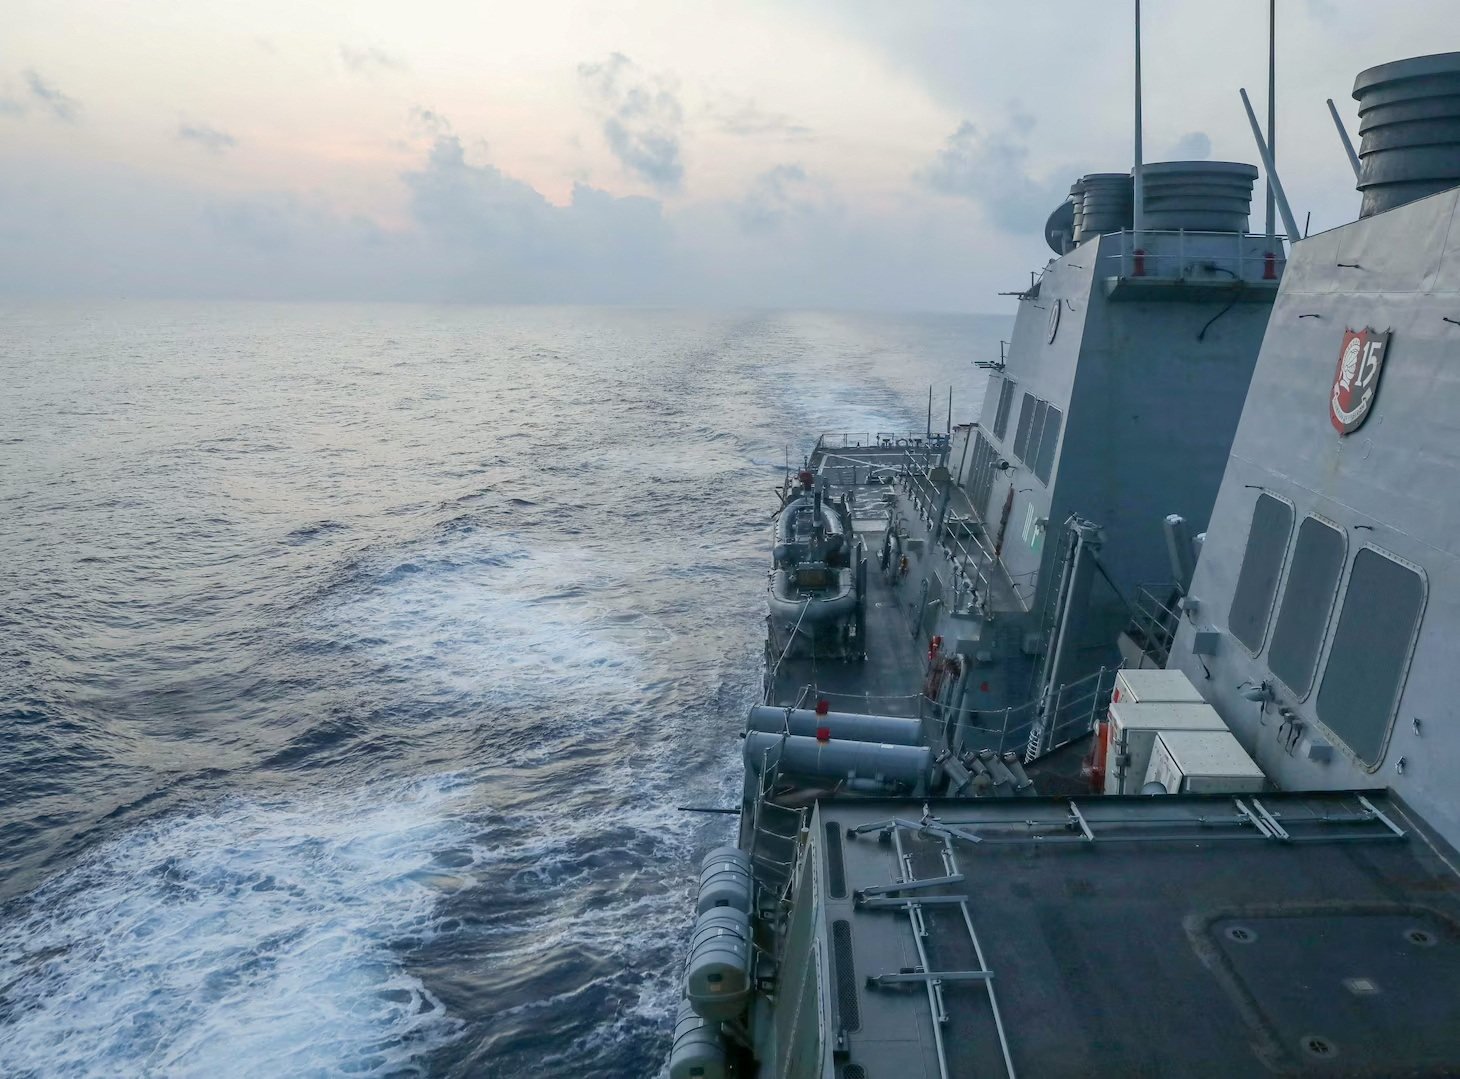 The Arleigh Burke-class guided-missile destroyer USS Milius is seen at an undisclosed location in the South China Sea, in a picture released on April 10. America’s military expansion in China’s neighbourhood gives Beijing a pretext to increase its military mobilisation. Photo: US Navy handout via Reuters